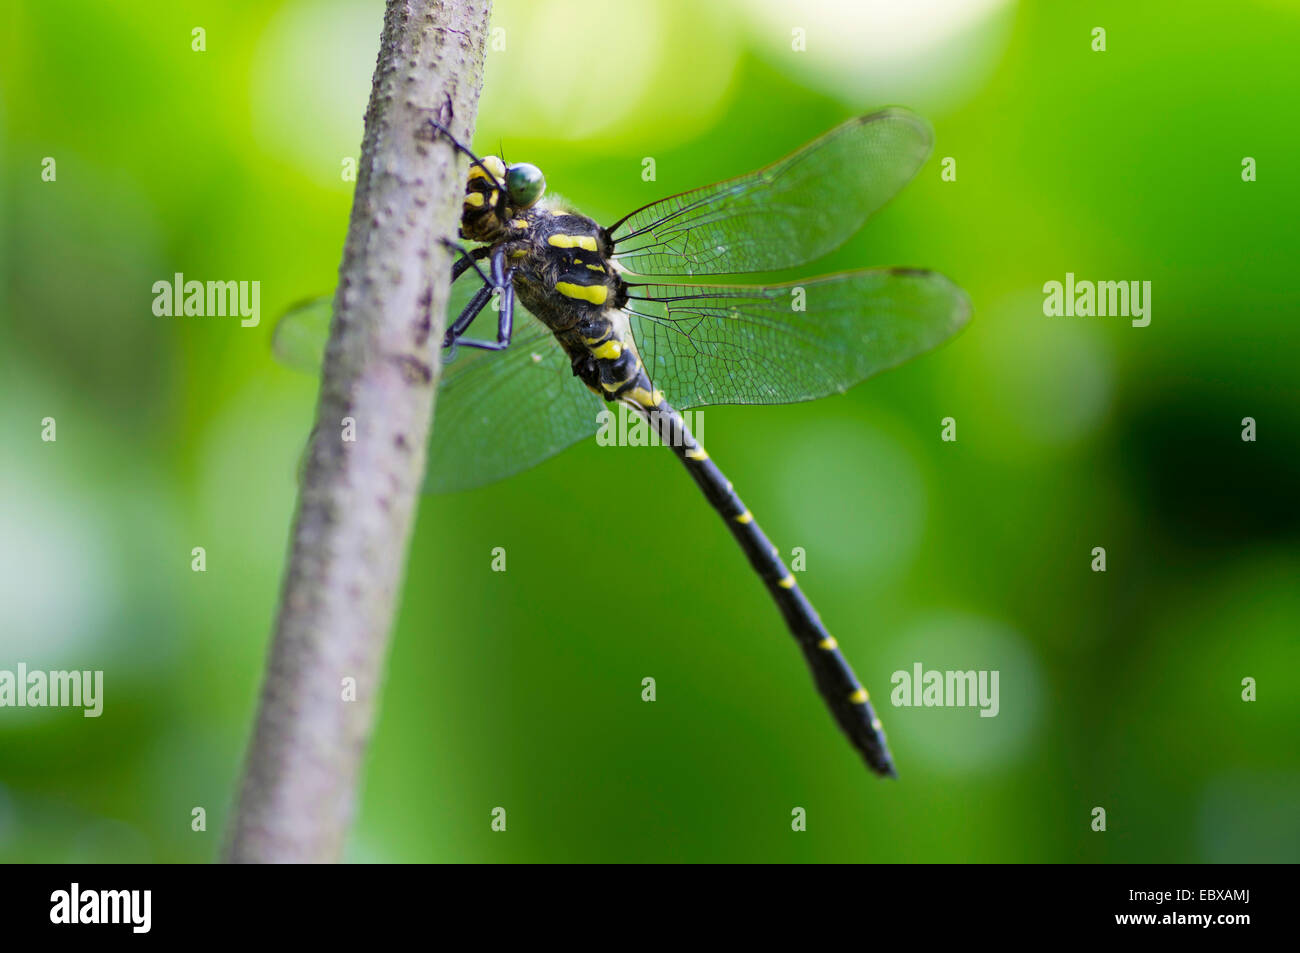 golden-ringed dragonfly (Cordulegaster boltoni), at a twig, Germany, Saxony Stock Photo